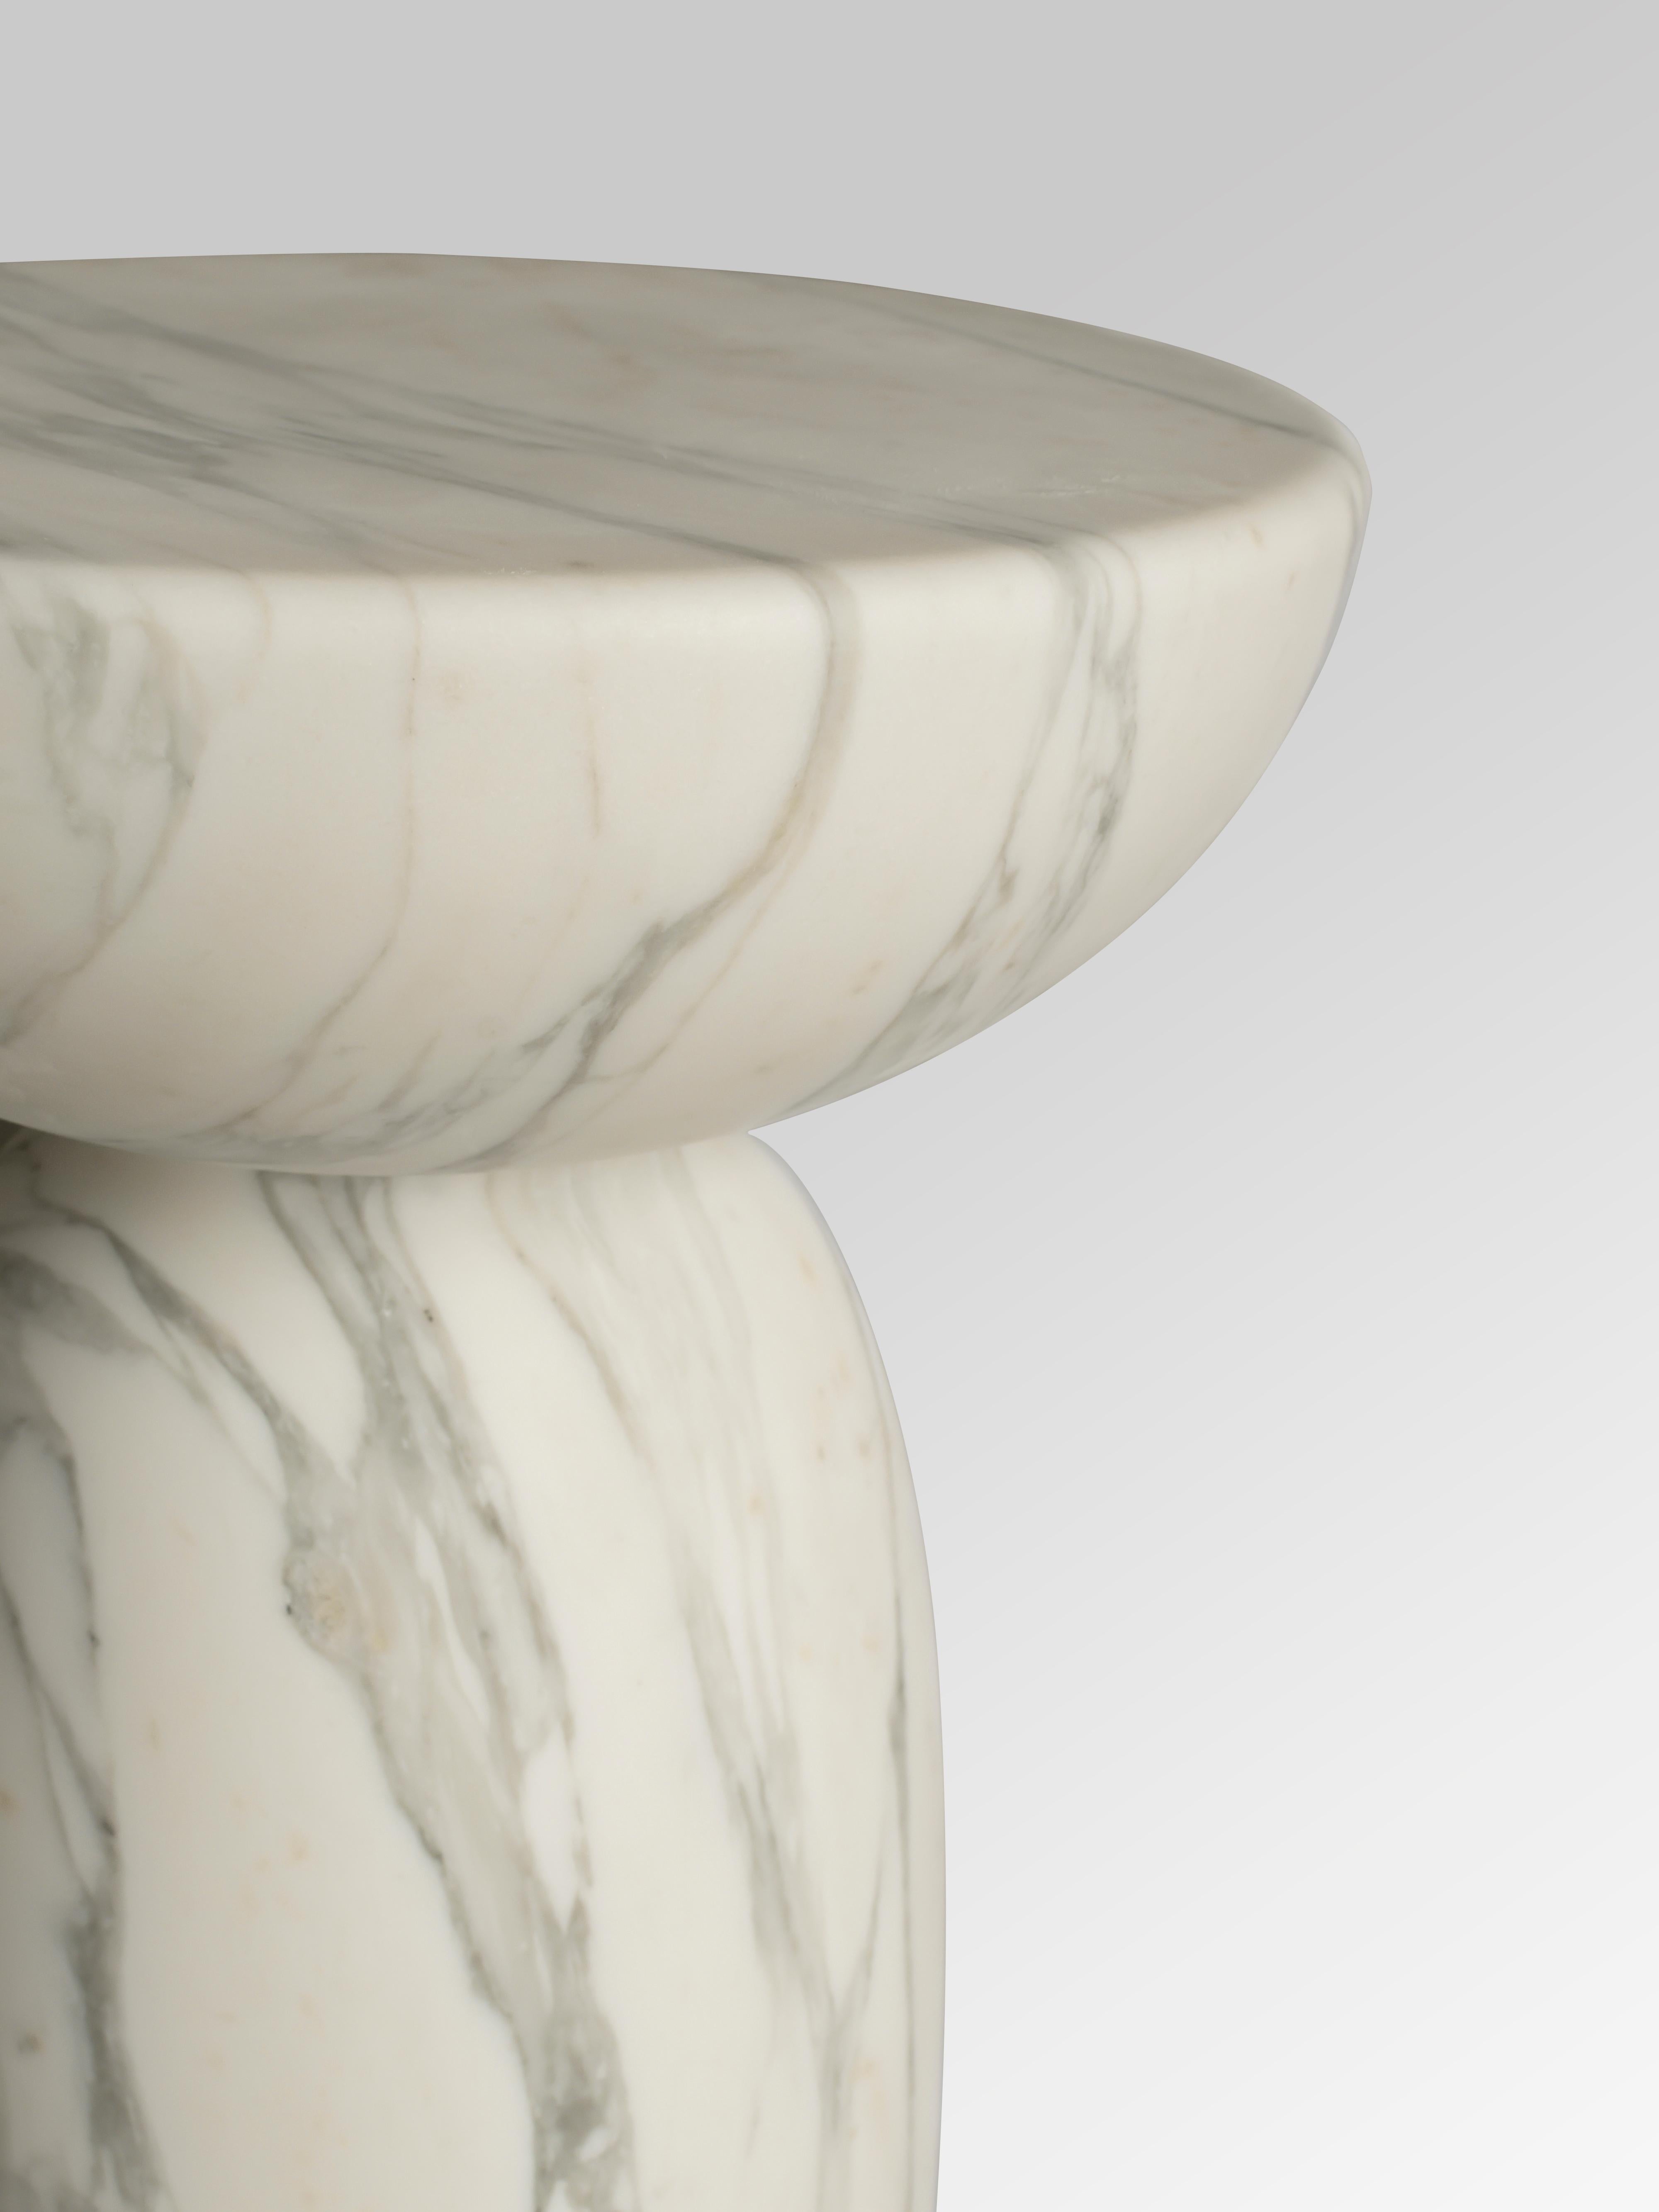 Other Pawn 2 Marble Side Table For Sale